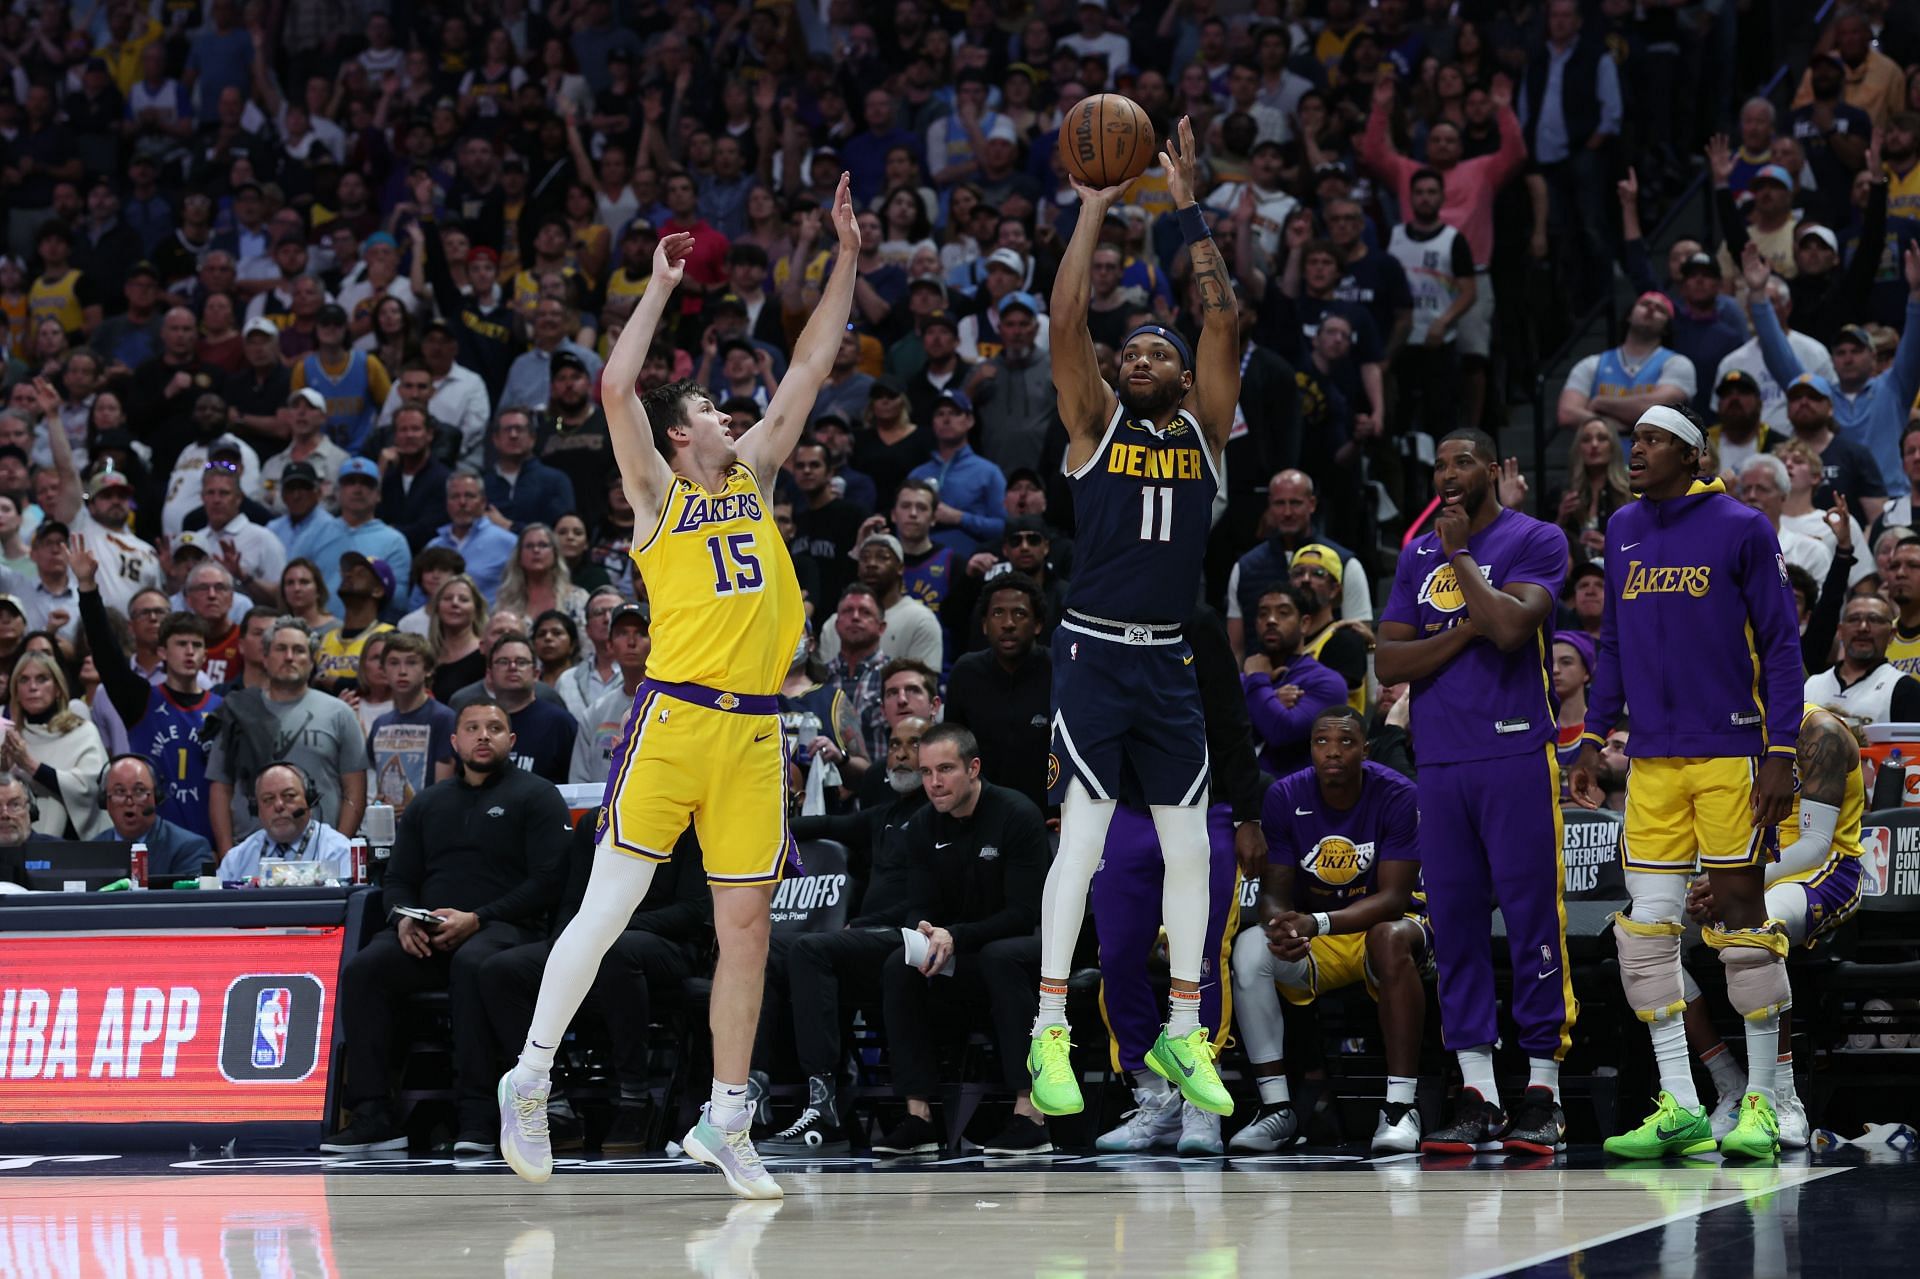 LA Lakers shooting guard Austin Reaves closing out on Denver Nuggets wing Bruce Brown&#039;s 3-point attempt in Game 2 of the Lakers-Nuggets Western Conference finals series